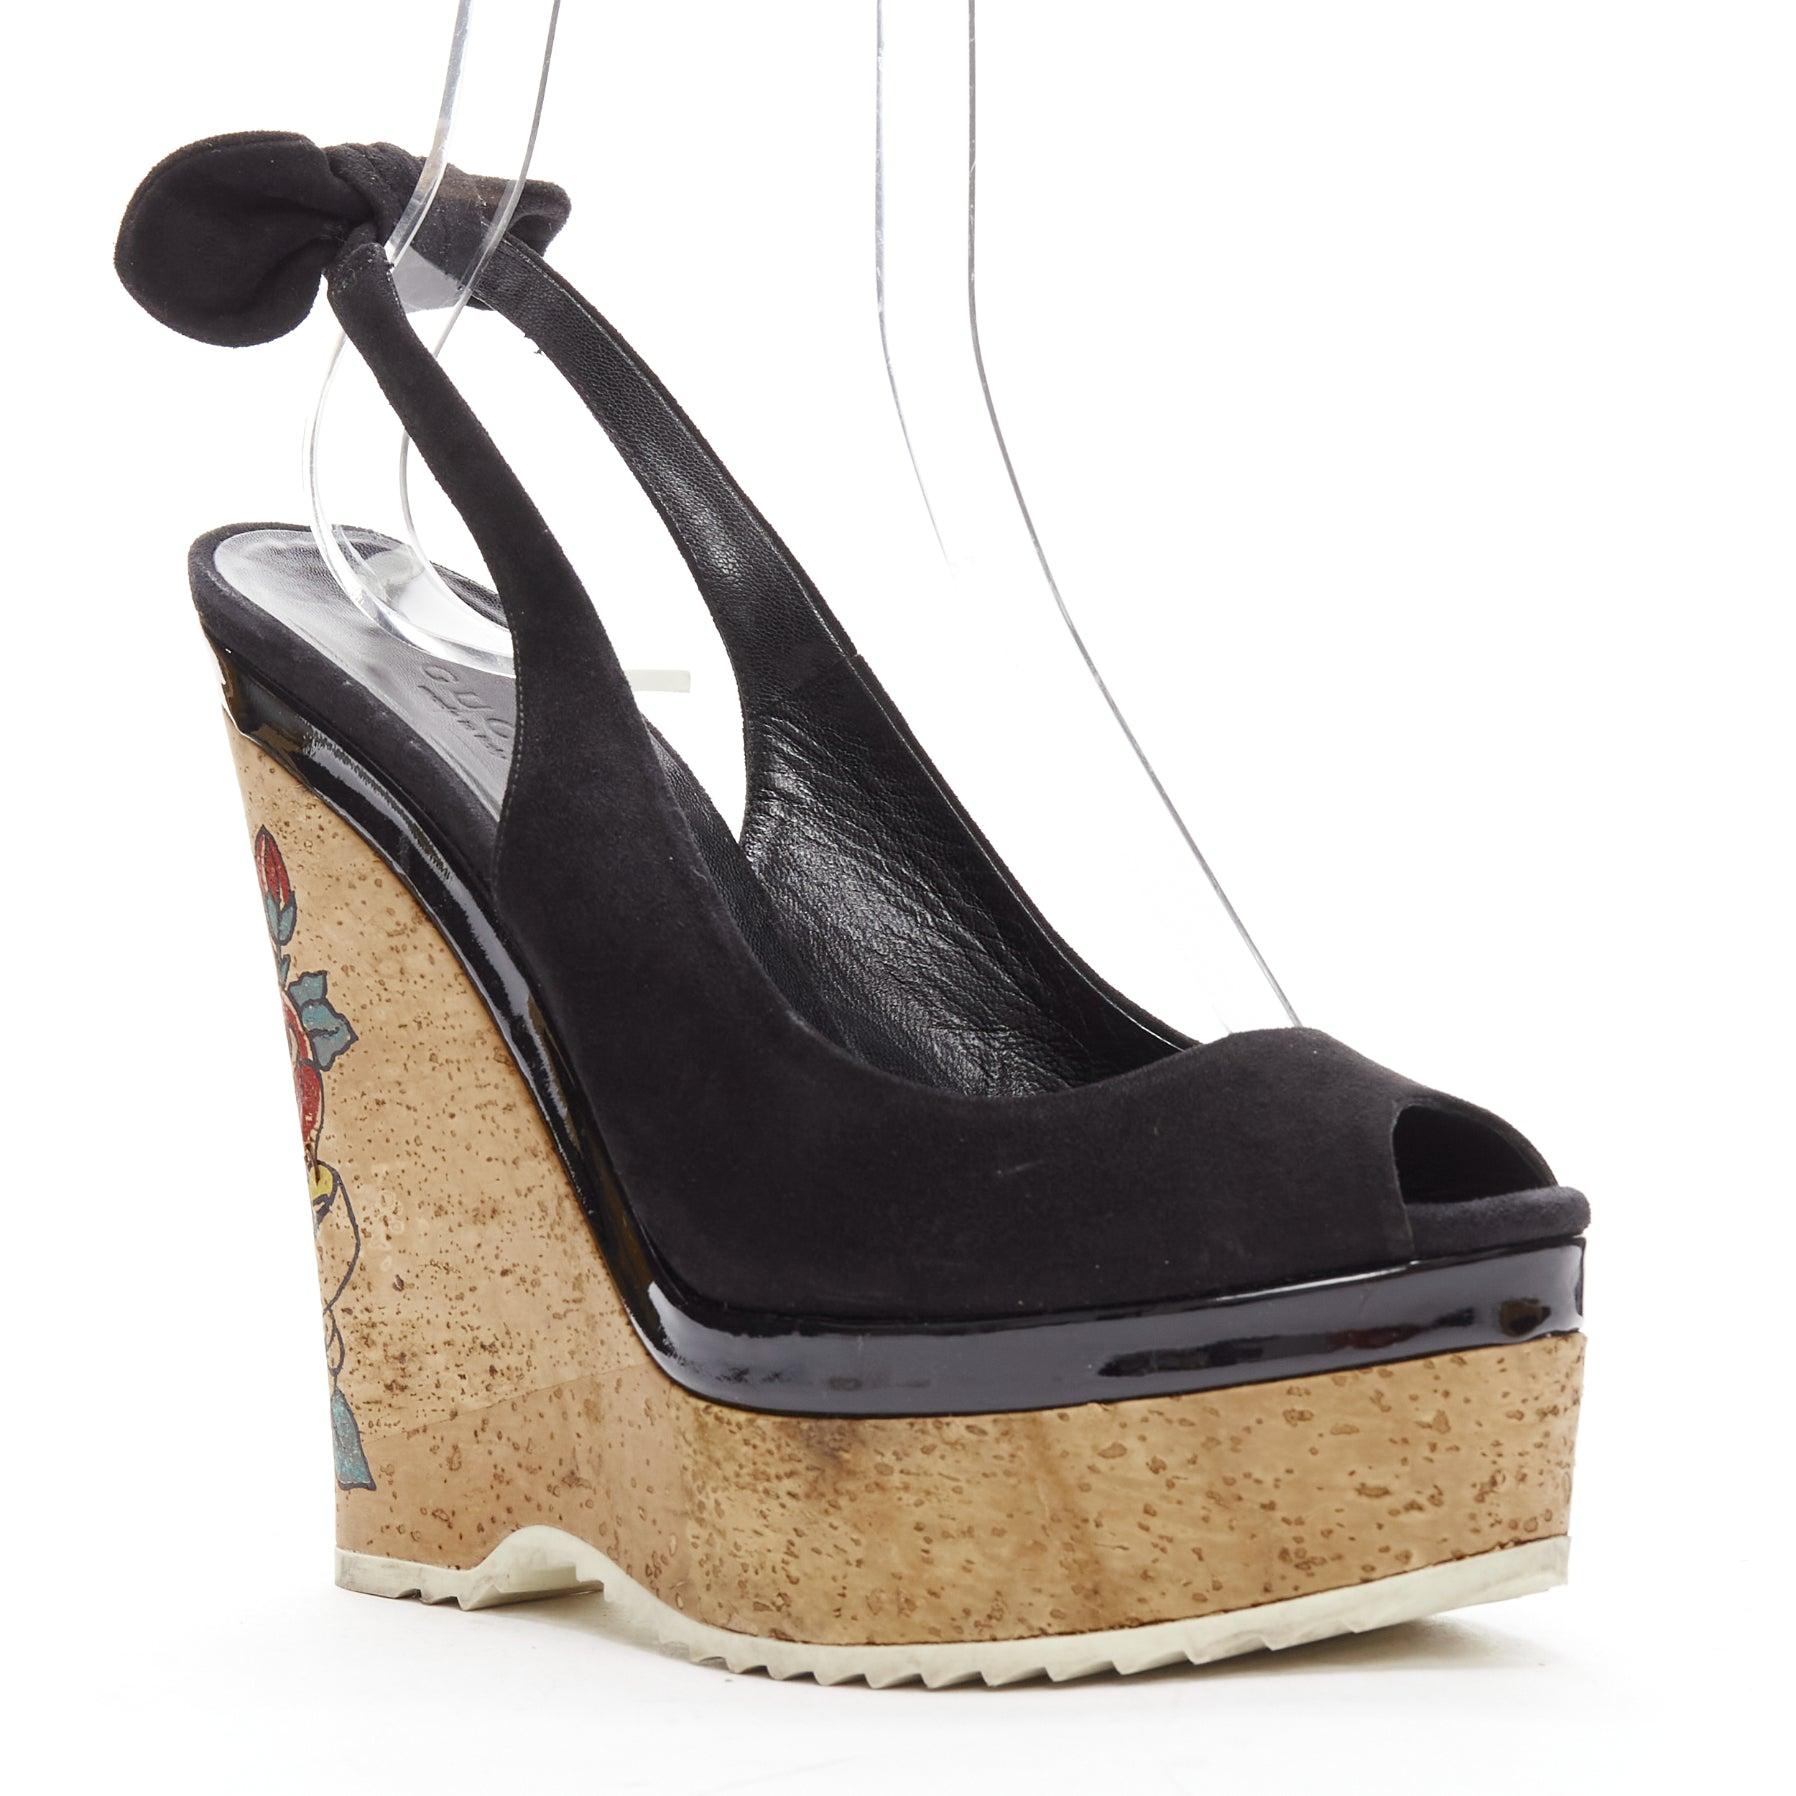 GUCCI Tattoo Heart brown cork black suede patent leather wedge heels EU36.5
Reference: CELE/A00006
Brand: Gucci
Material: Suede
Color: Black, Brown
Pattern: Tattoo
Closure: Ankle Strap
Lining: Black Leather
Extra Details: GUCCI heart tattoo motive